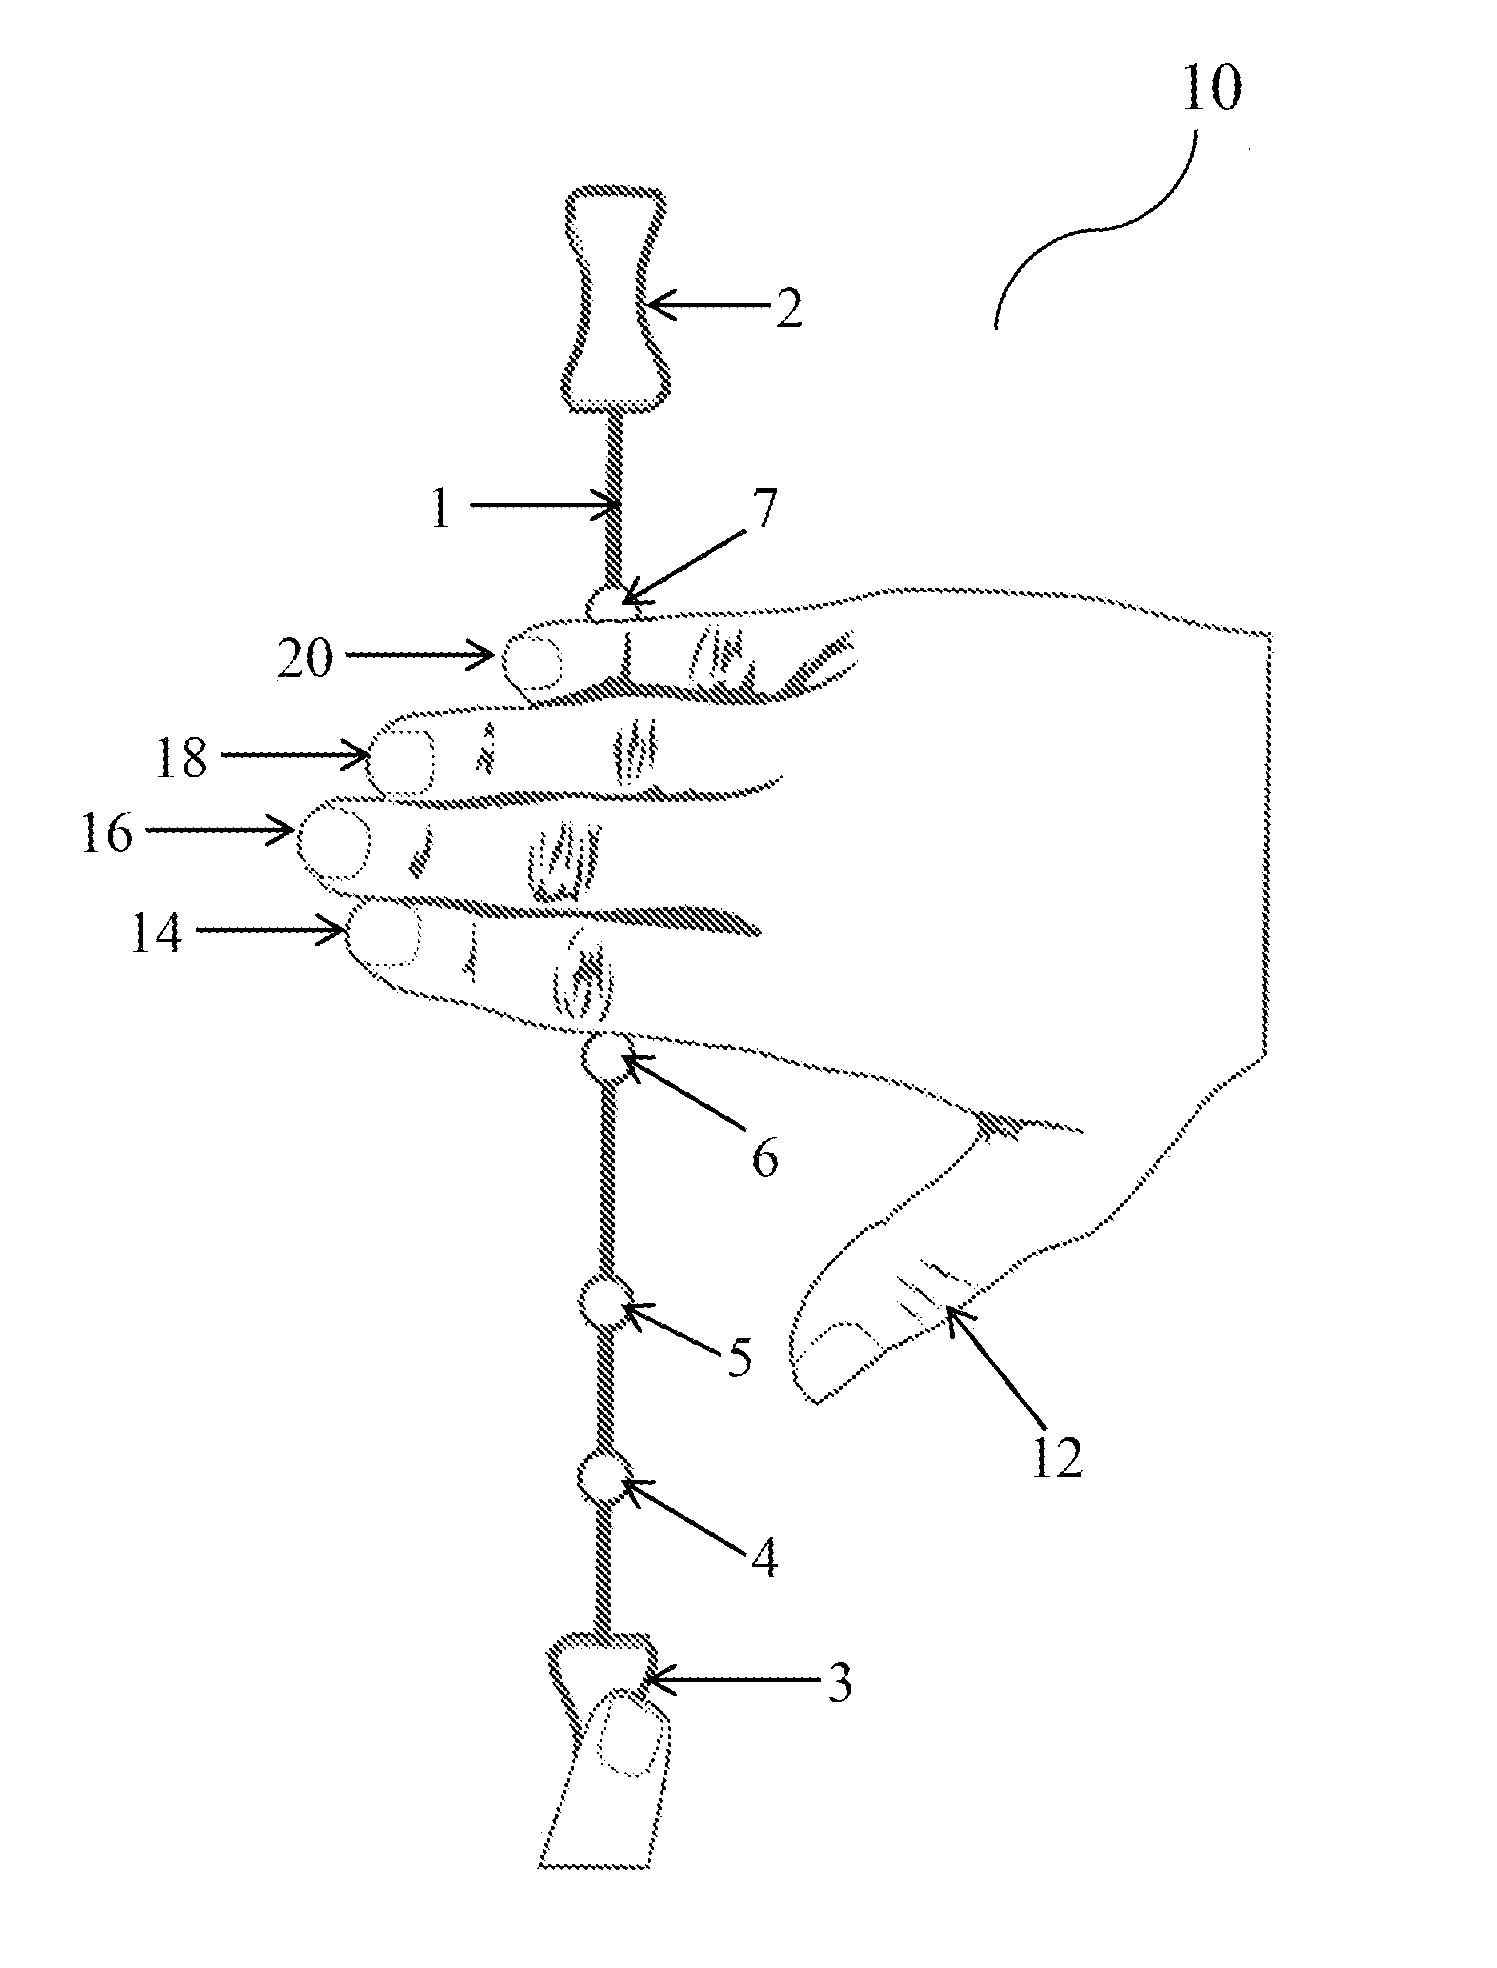 Apparatus and method for accurate cun self measurements